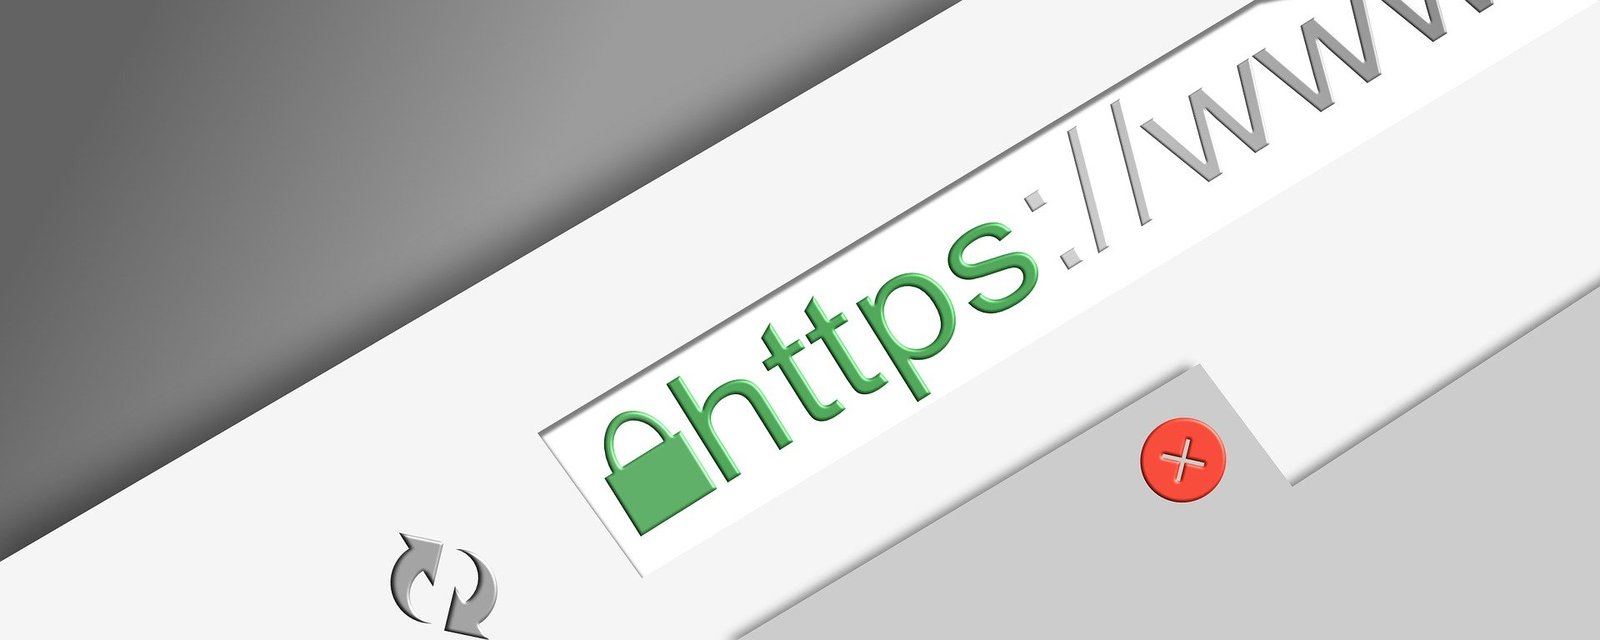 Top 5 Best SEO Practices for Bloggers, Publishers and Content Creators_Get An SSL Certificate For Your Website